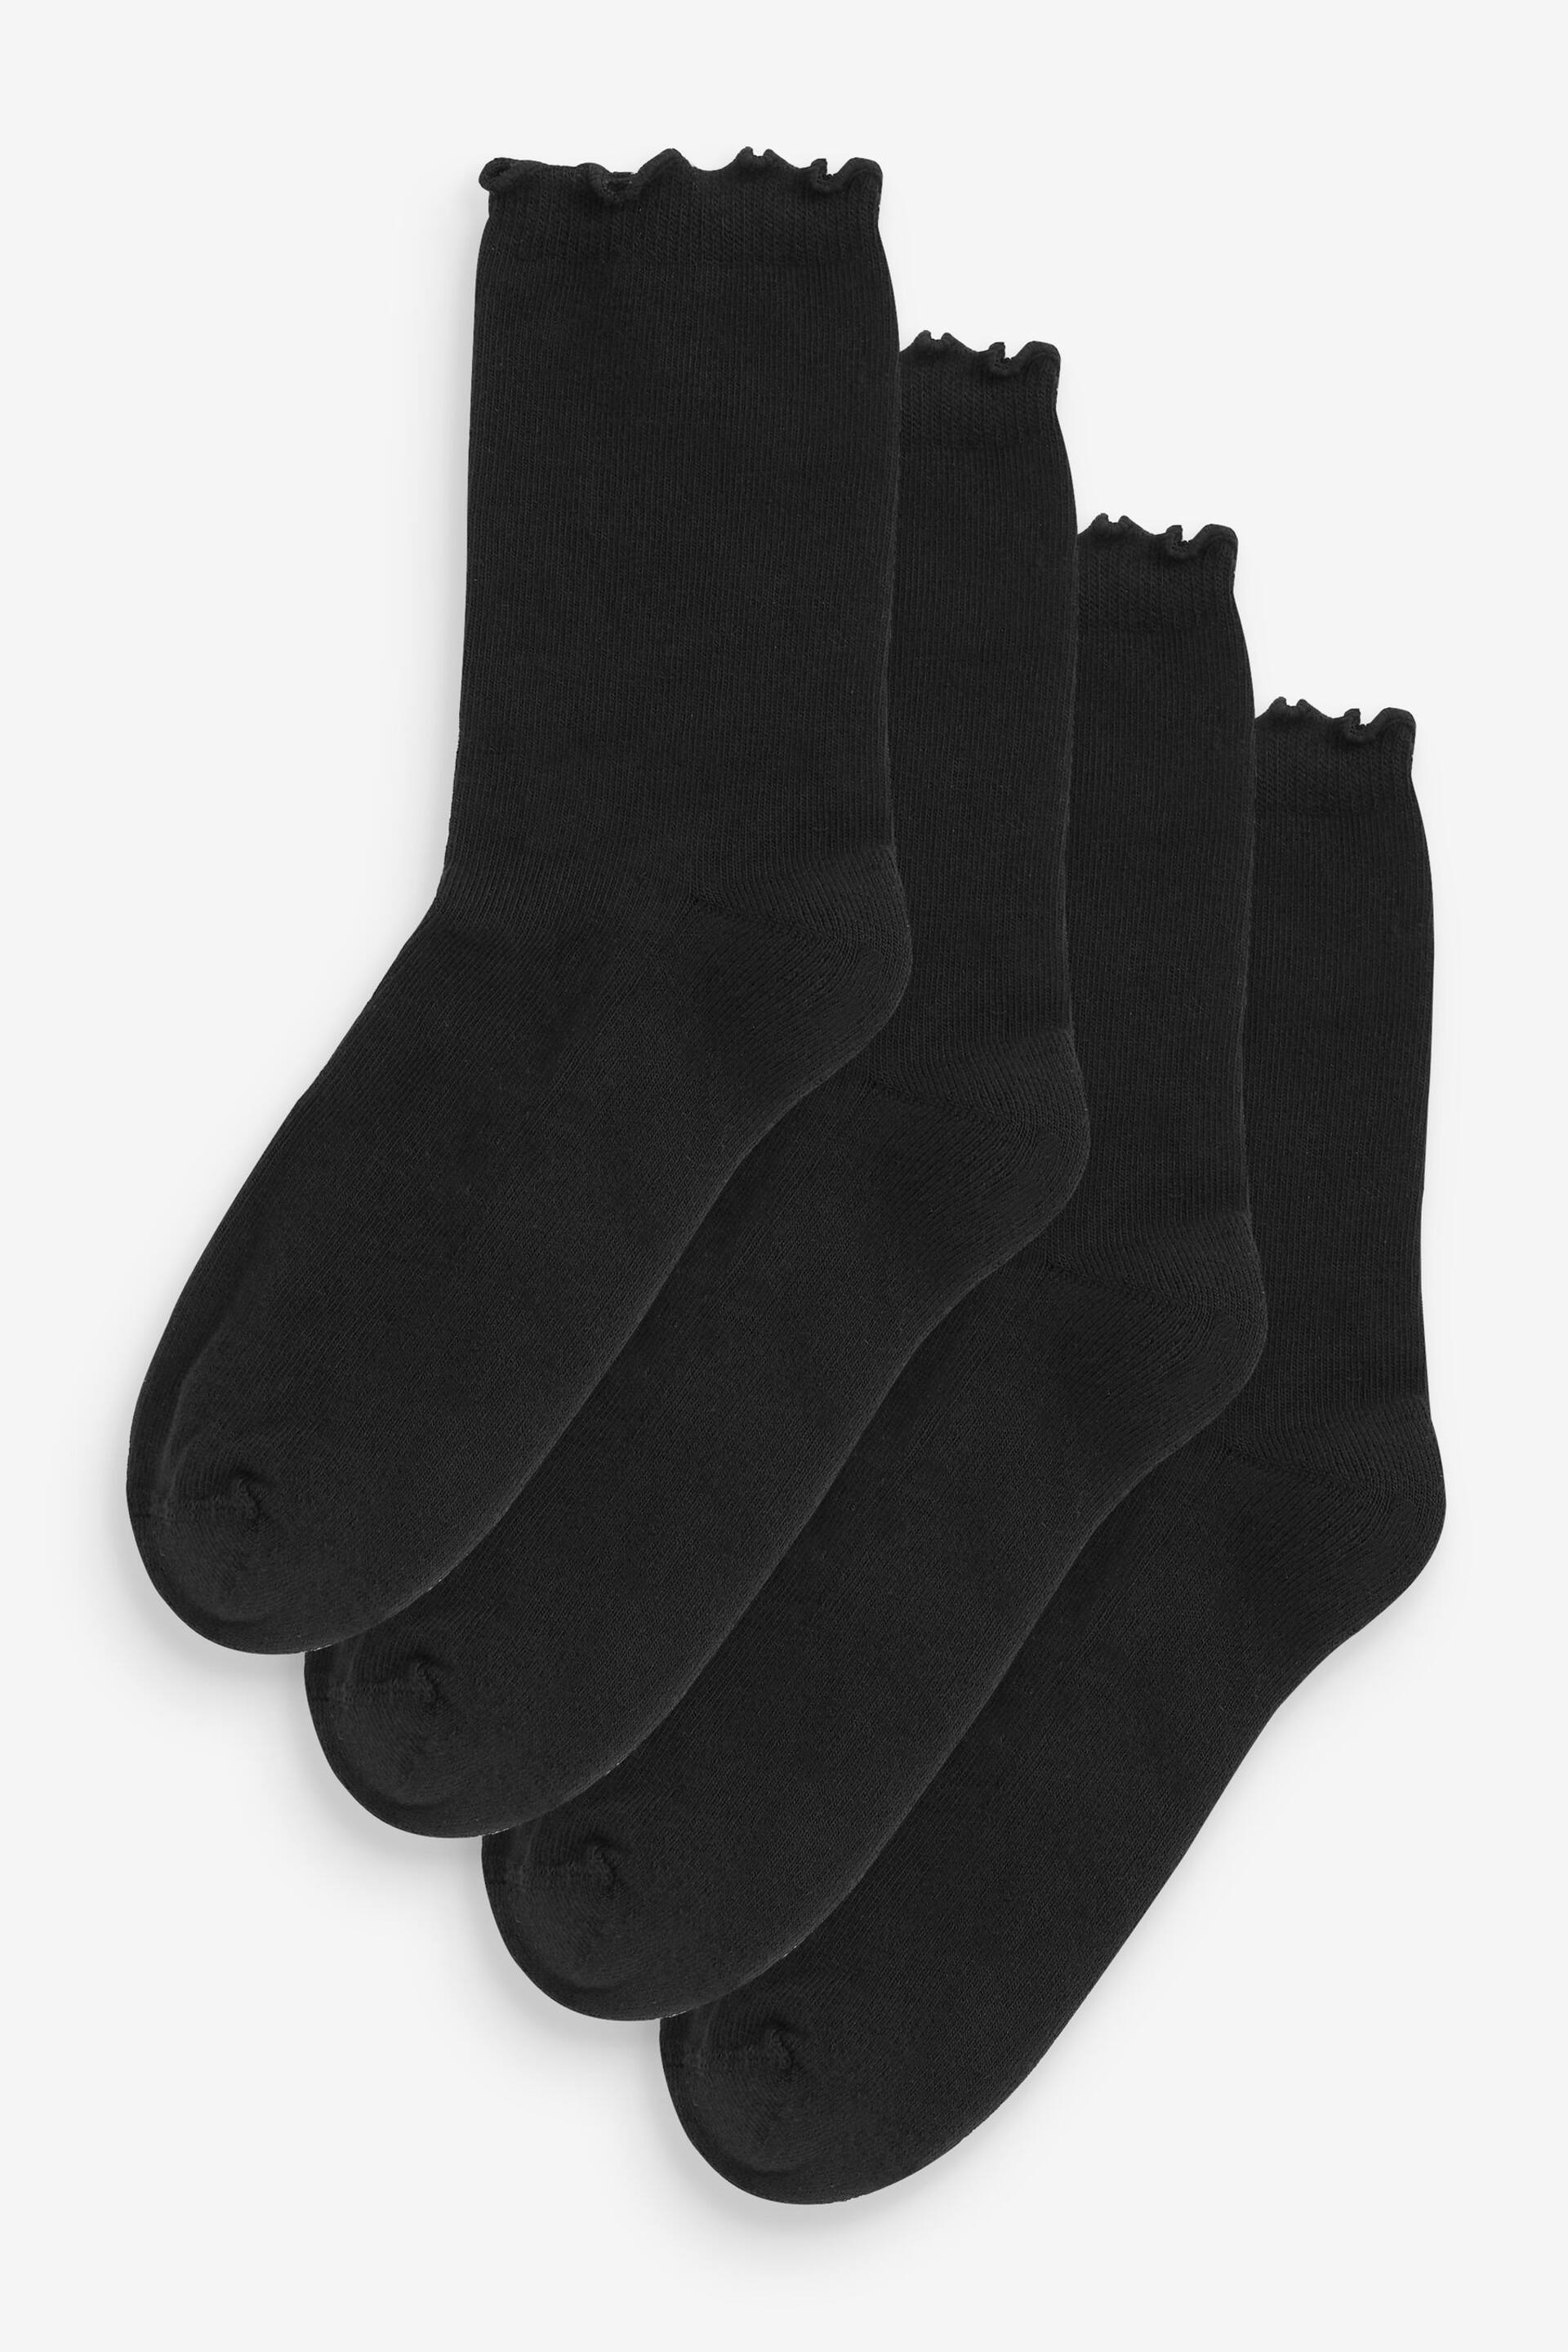 Black Frill Top Cushion Sole Ankle Socks 4 Pack - Image 1 of 5